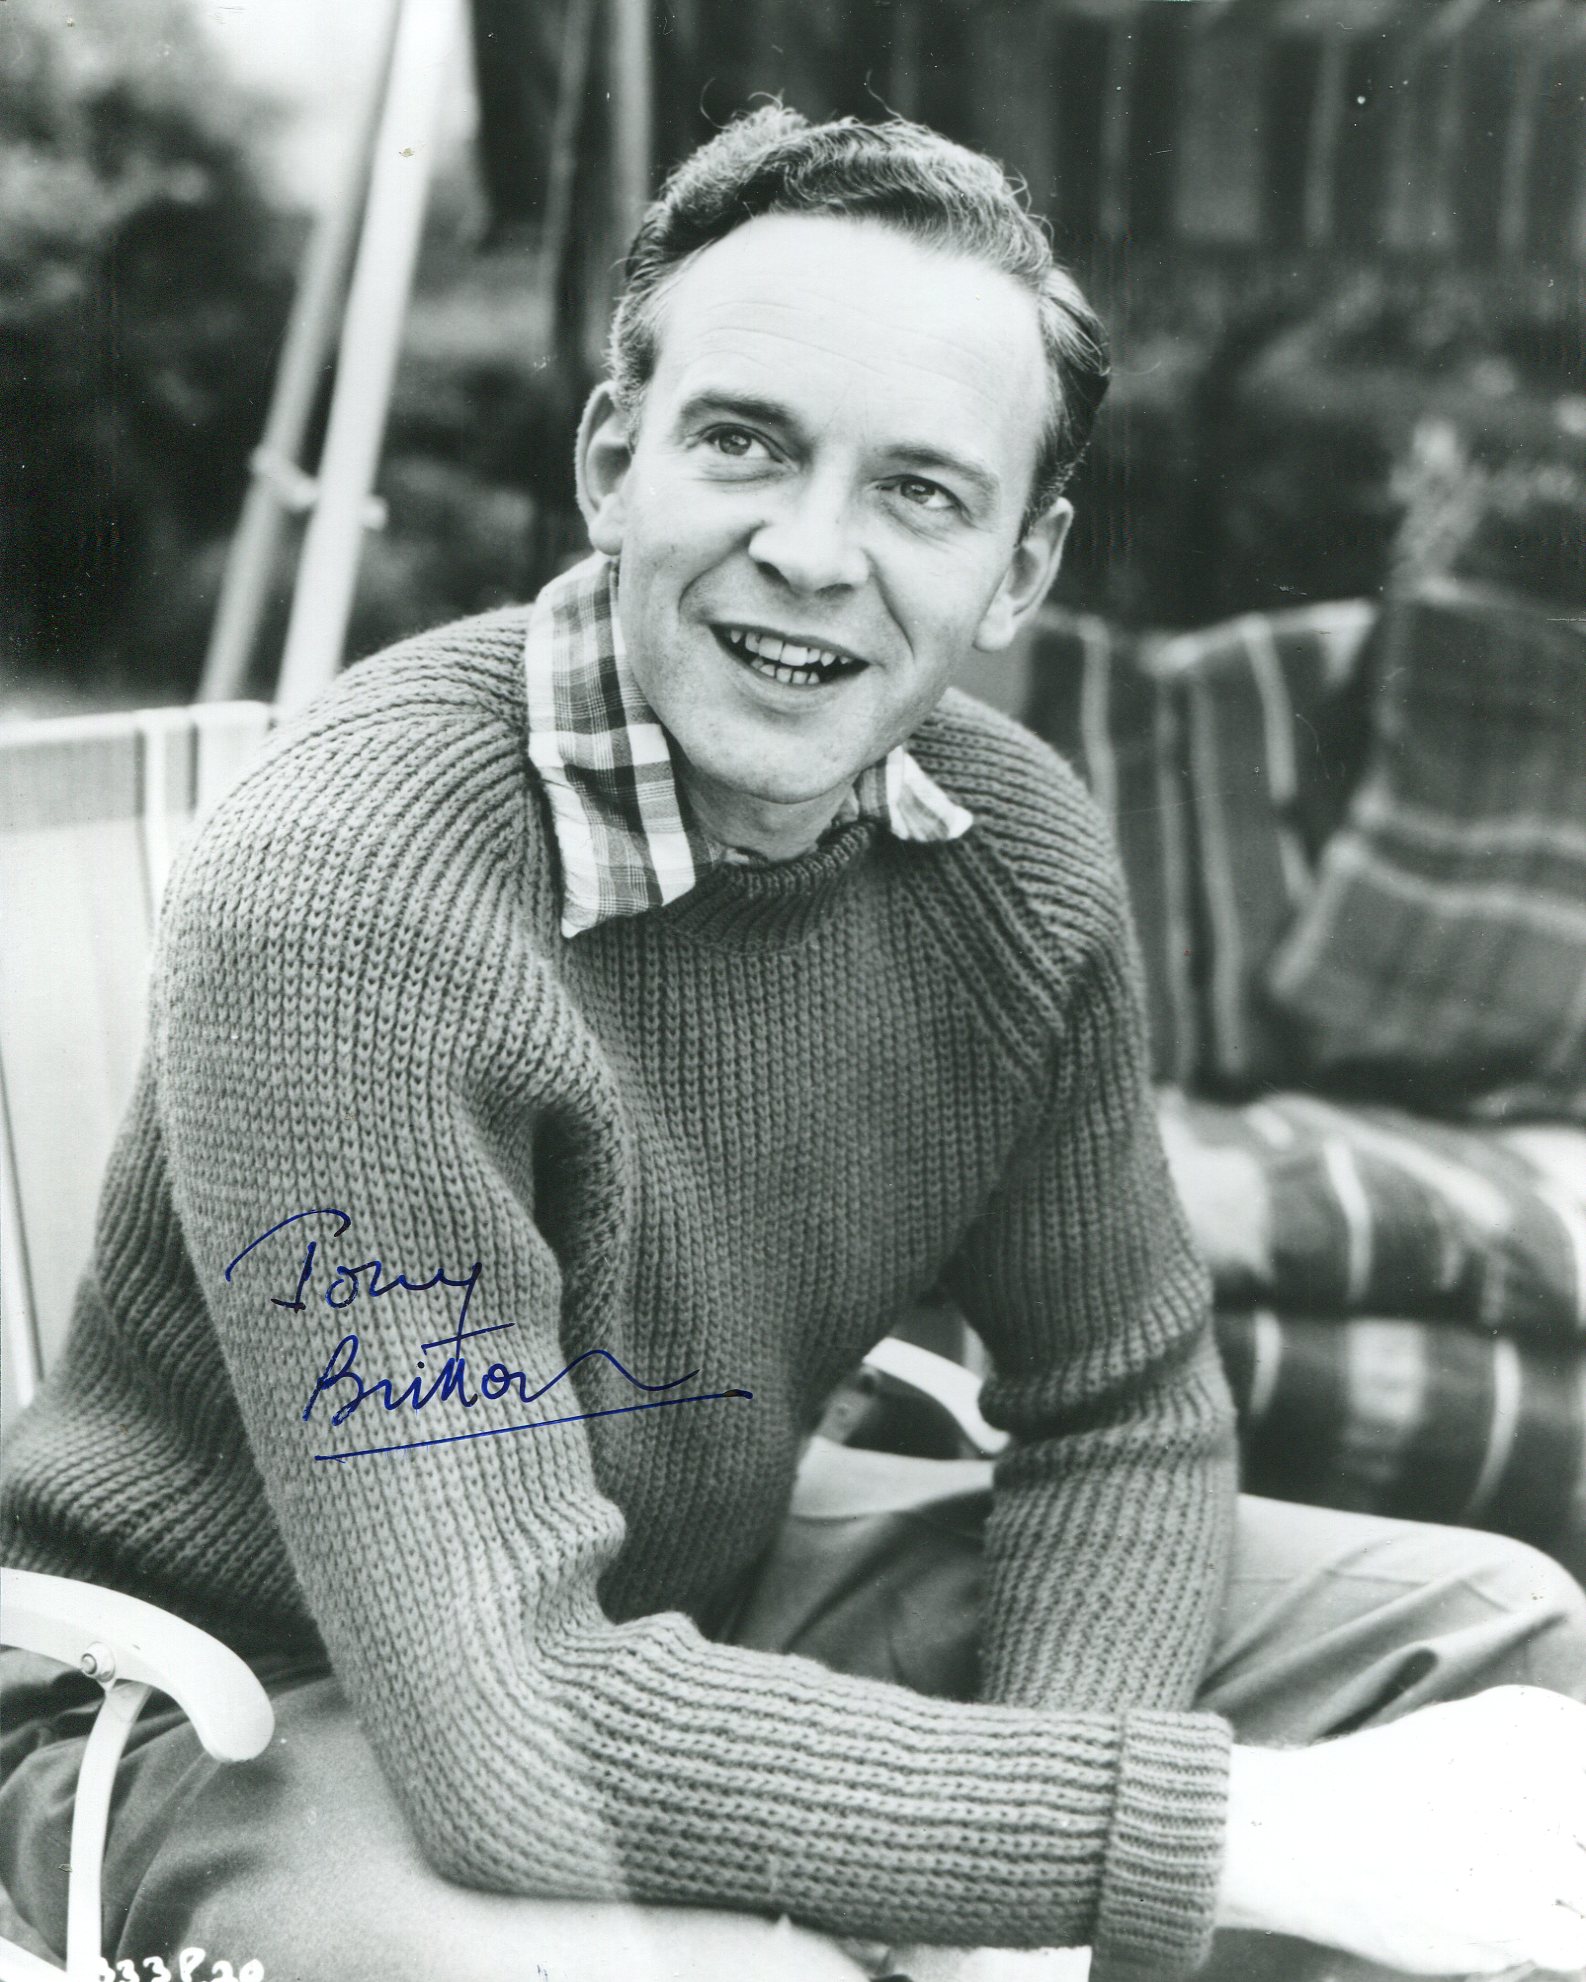 Tony Britton 8x10 Photo Signed By The Late British TV And Movie Actor Tony Britton. Good